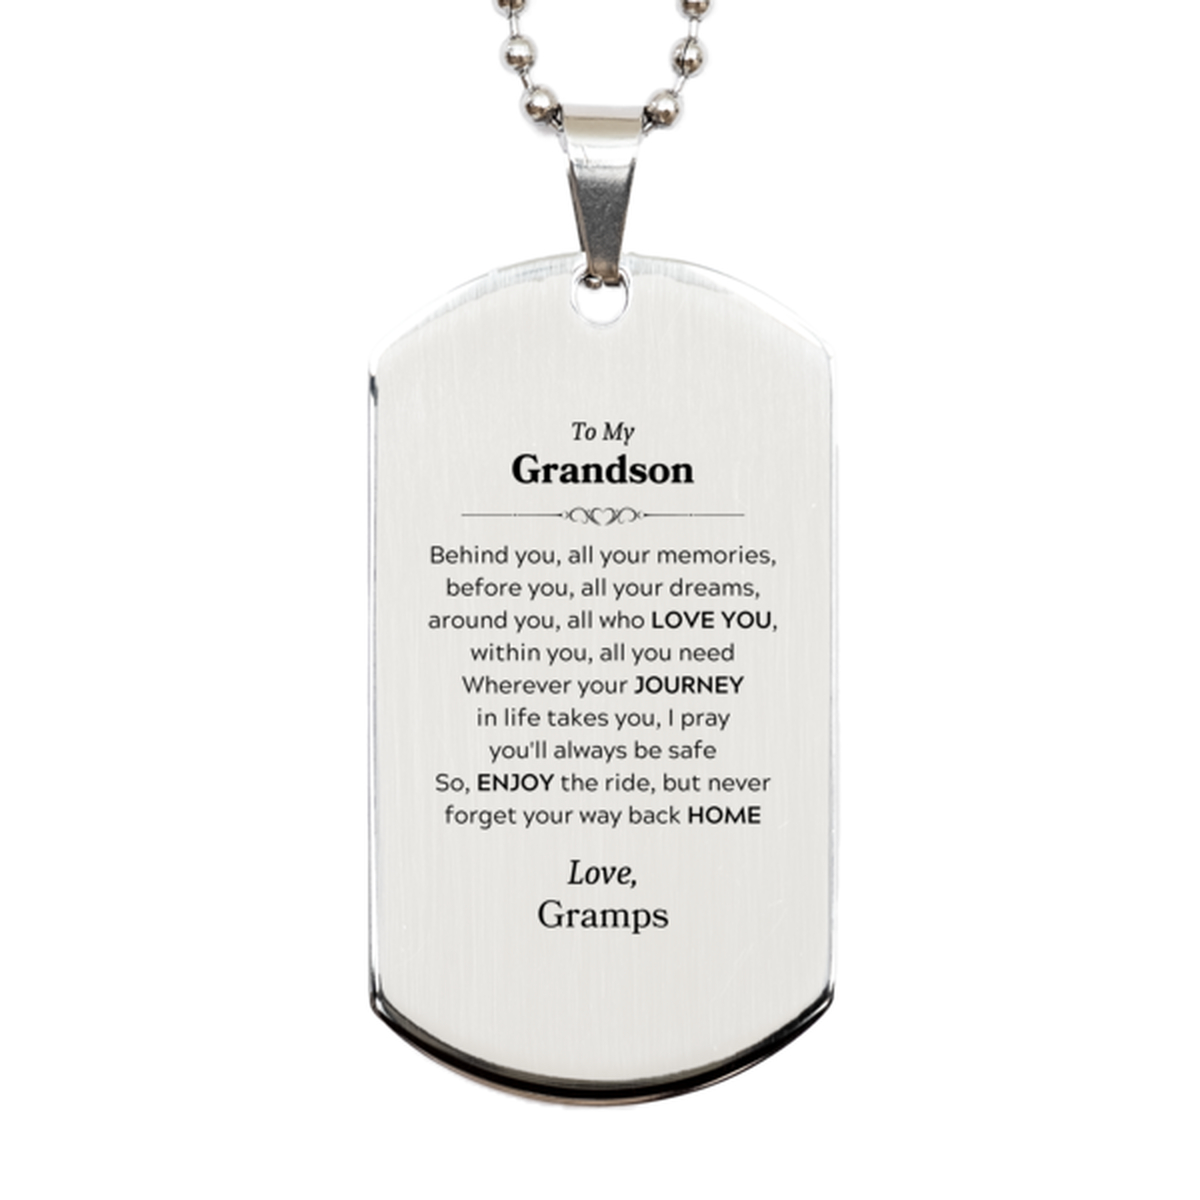 To My Grandson Graduation Gifts from Gramps, Grandson Silver Dog Tag Christmas Birthday Gifts for Grandson Behind you, all your memories, before you, all your dreams. Love, Gramps